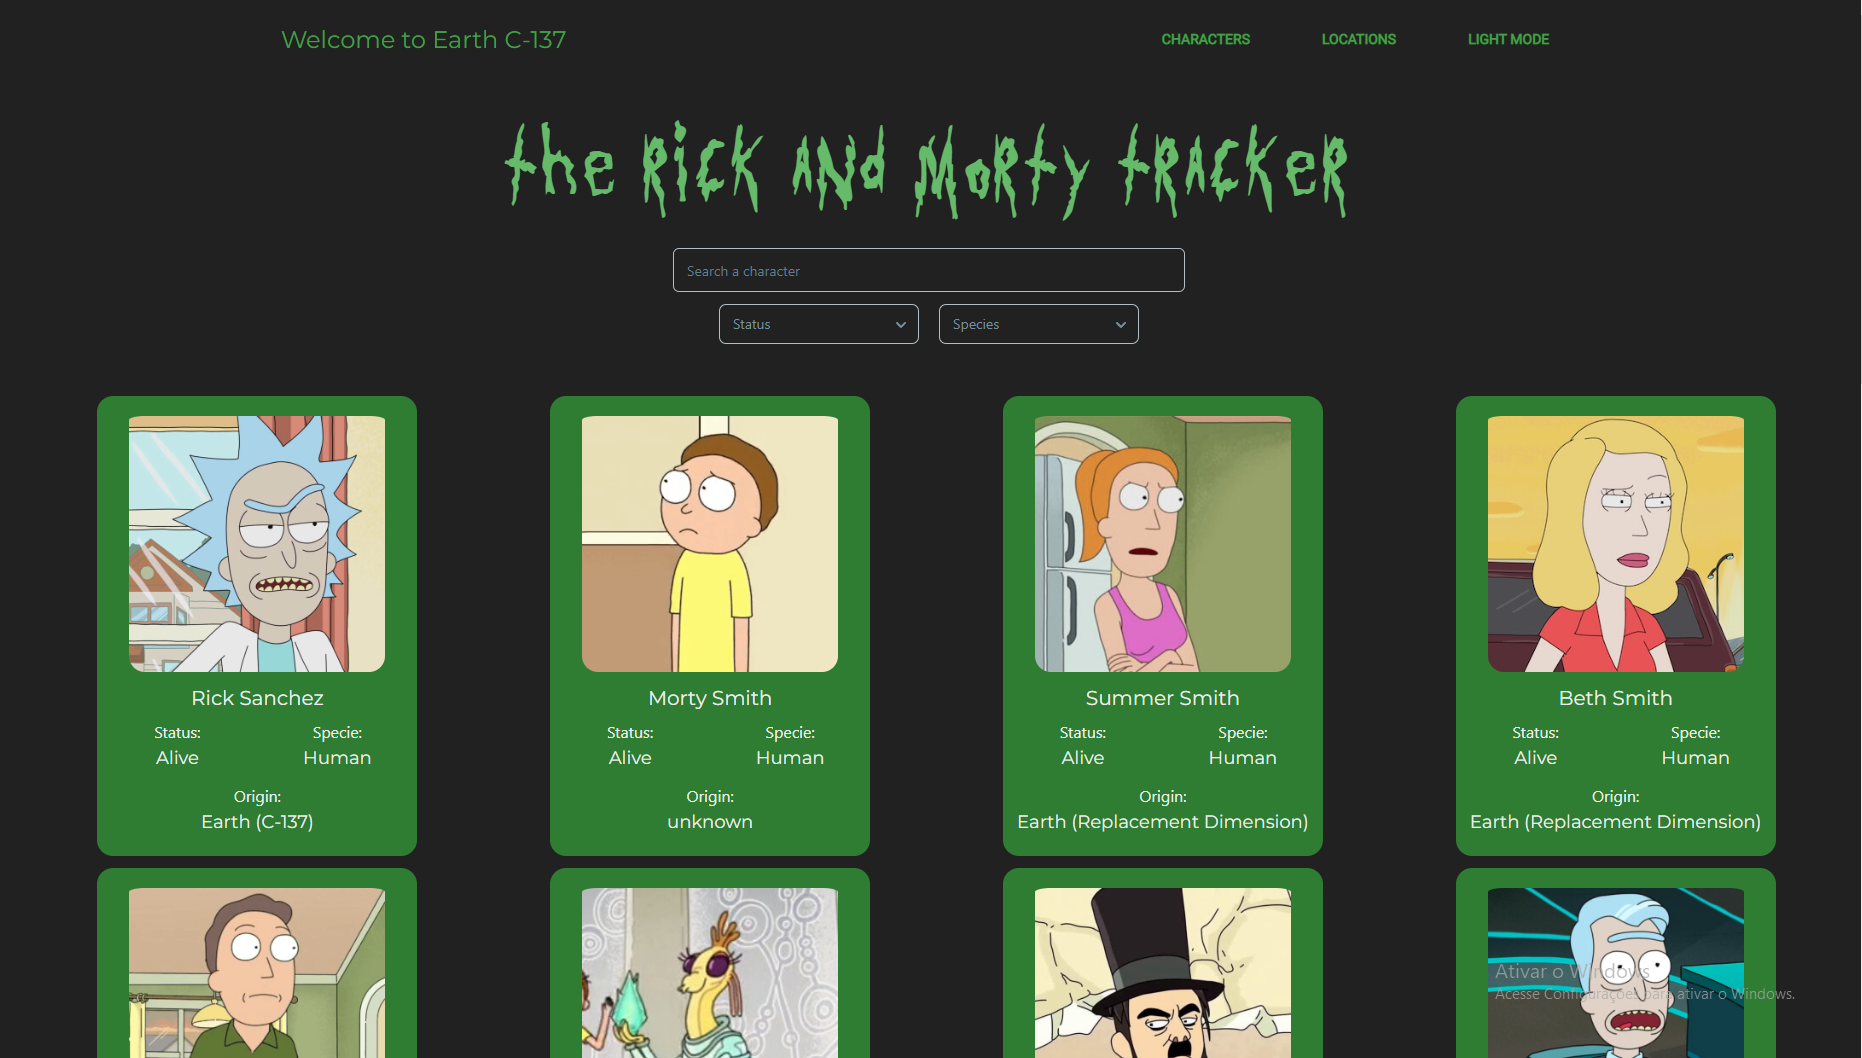 Rick and morty web page